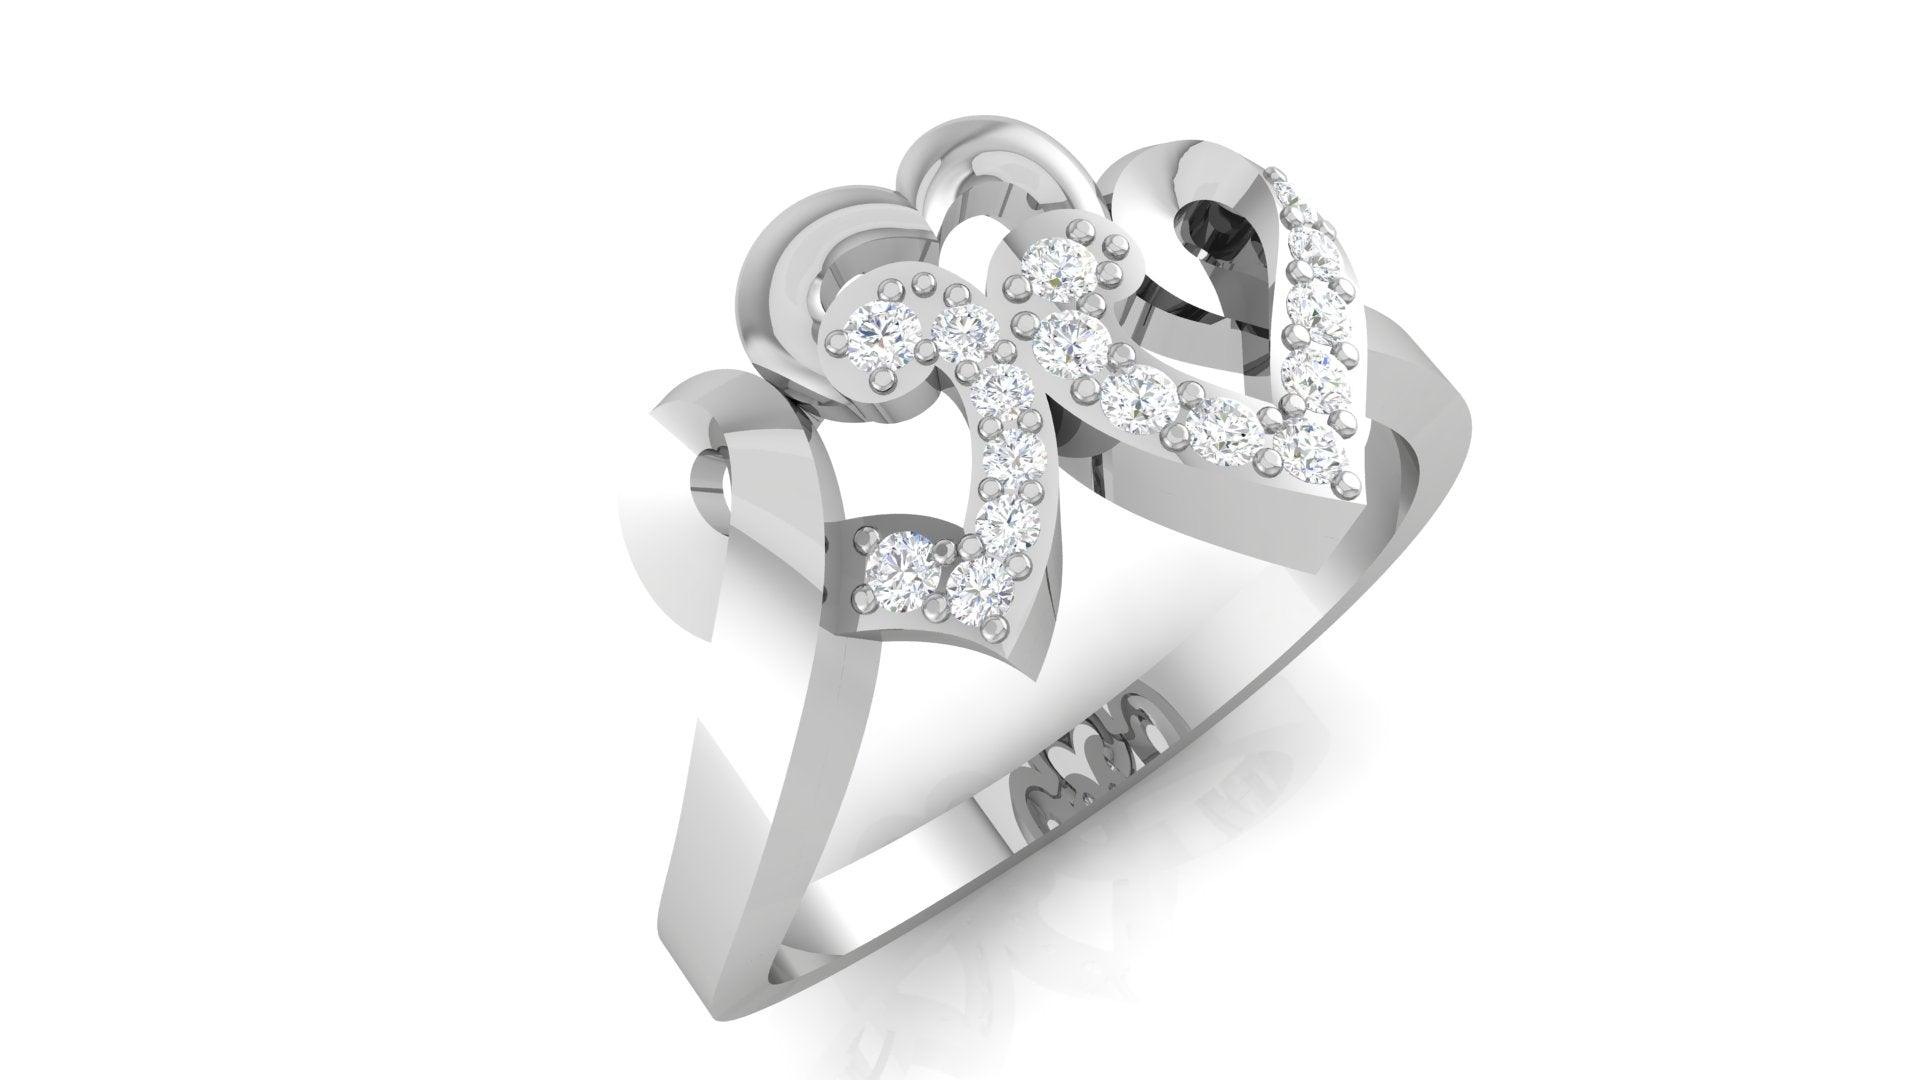 Auory 925 Sterling Silver Heart Ring AUPR-208 - Auory